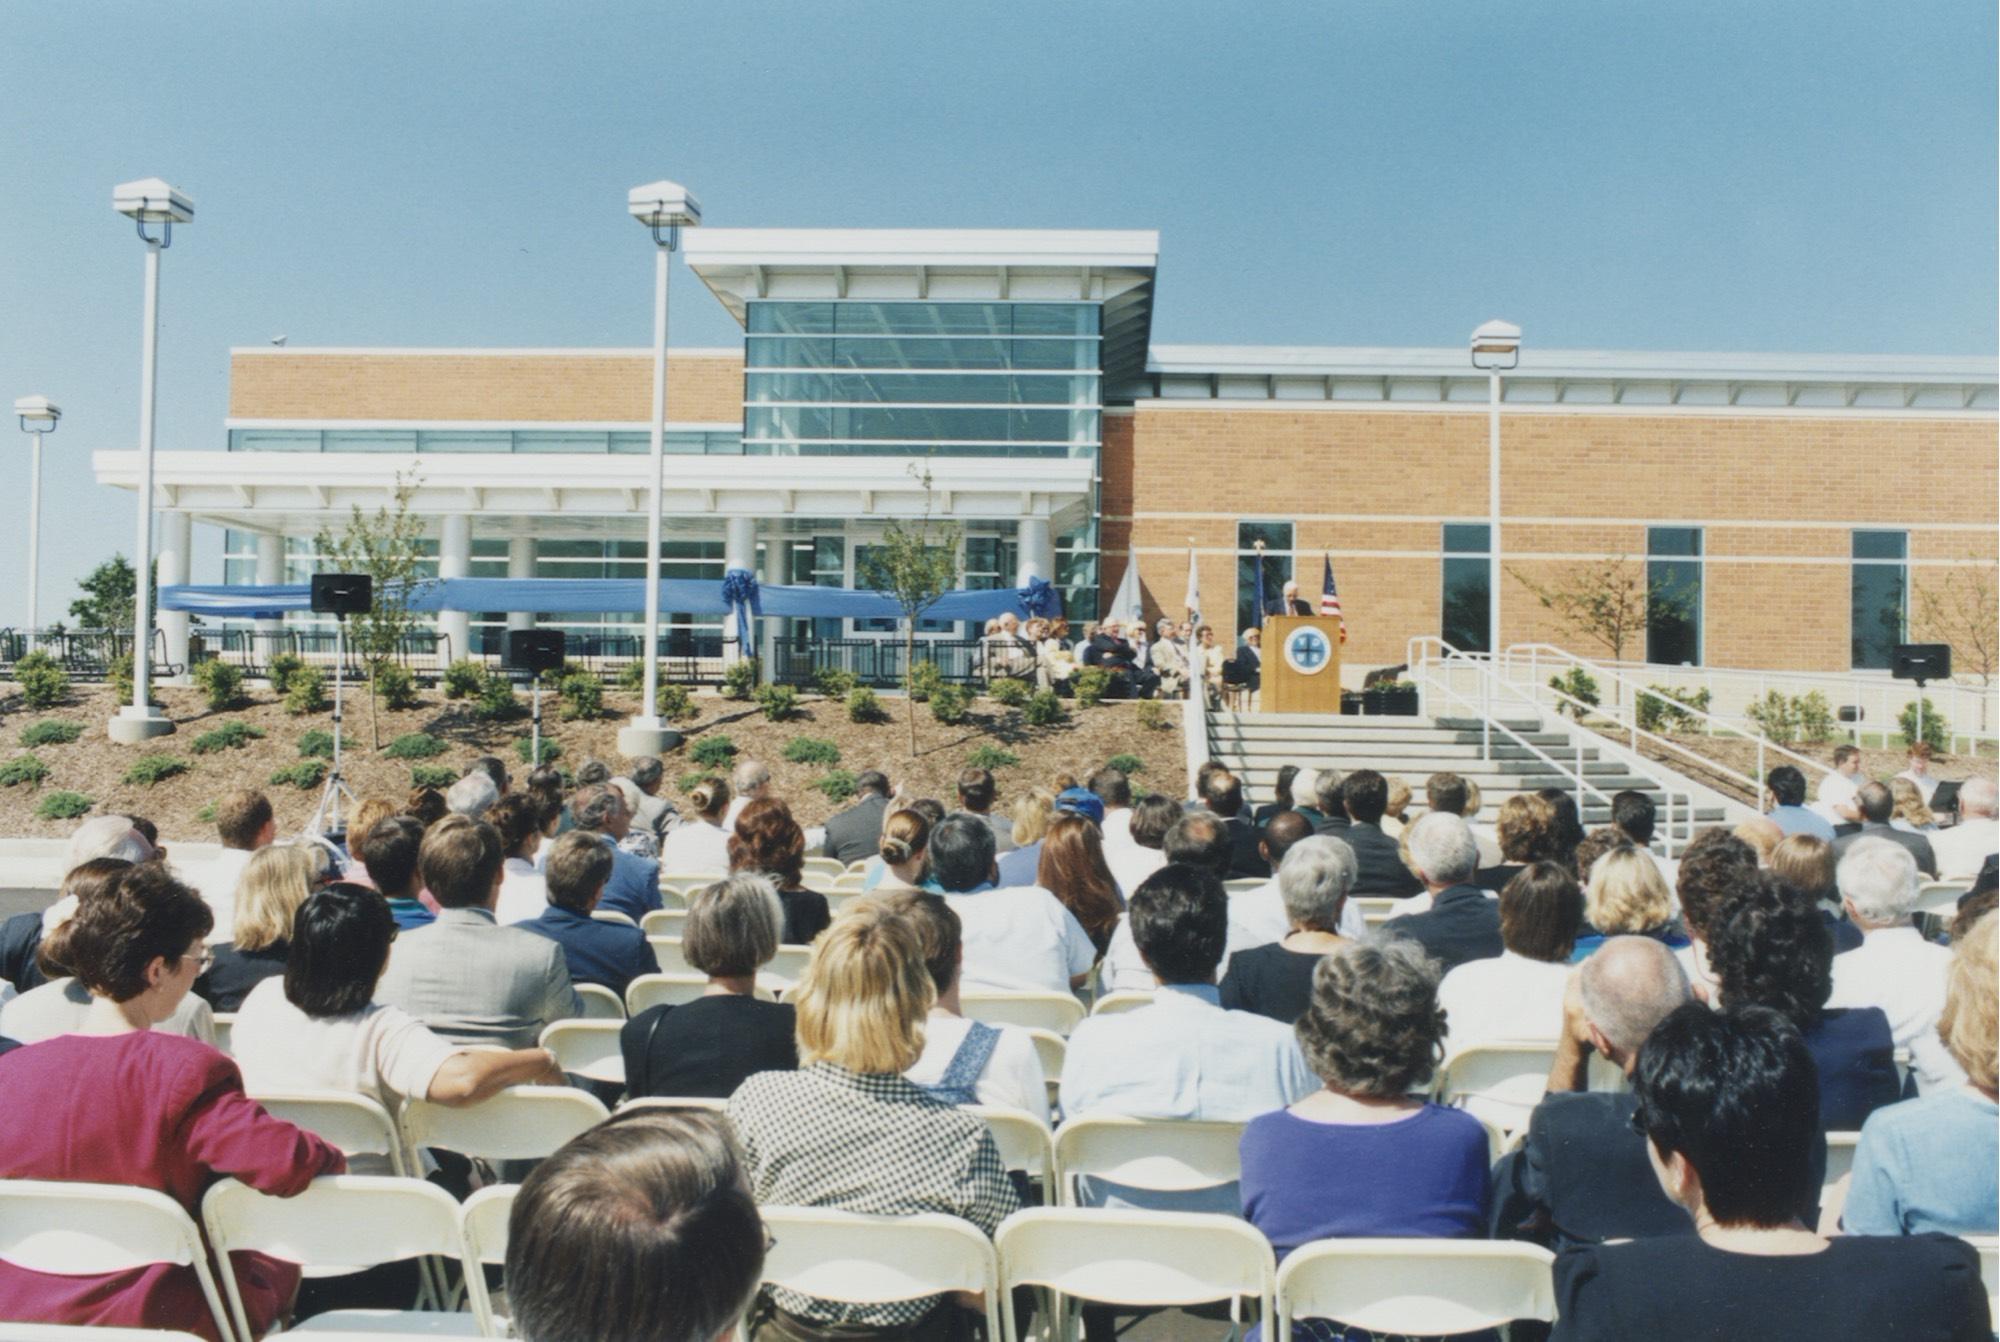 The Grand Valley State University Meijer Campus in Holland was dedicated in 1998. President Arend Lubbers is shown speaking at the podium during the ceremony.